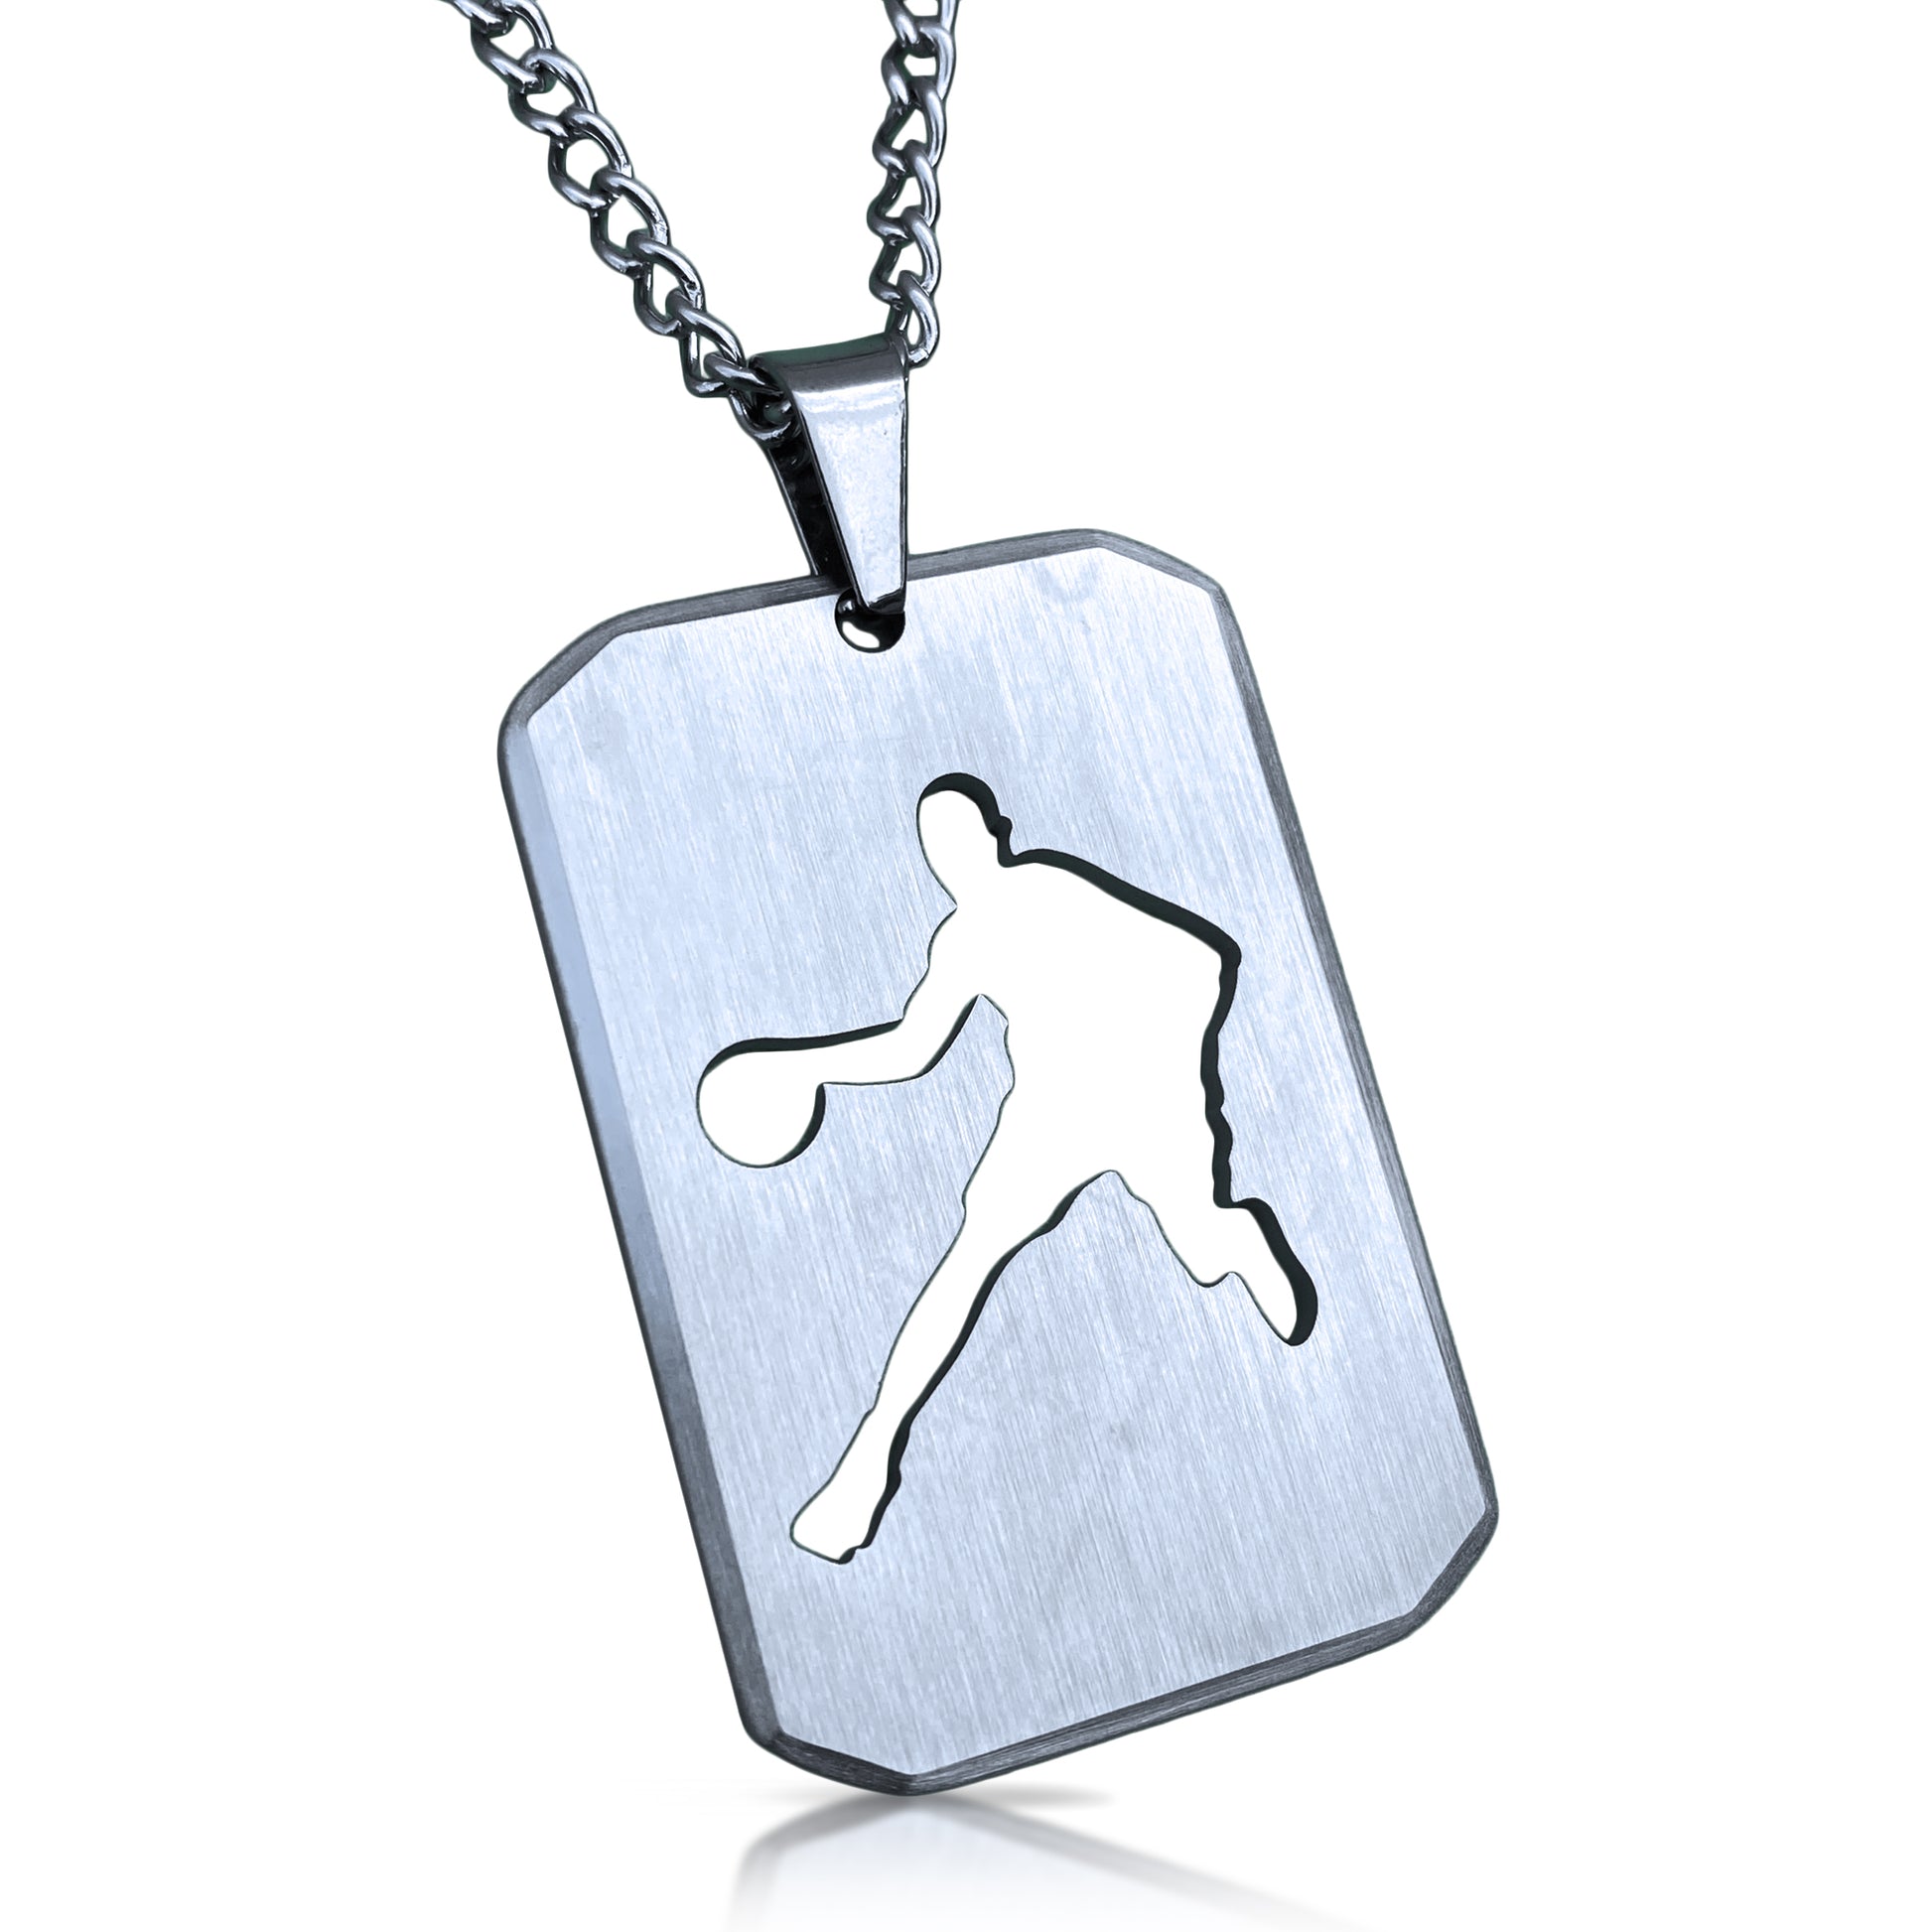 Basketball Cut Out Pendant With Chain Necklace - Stainless Steel